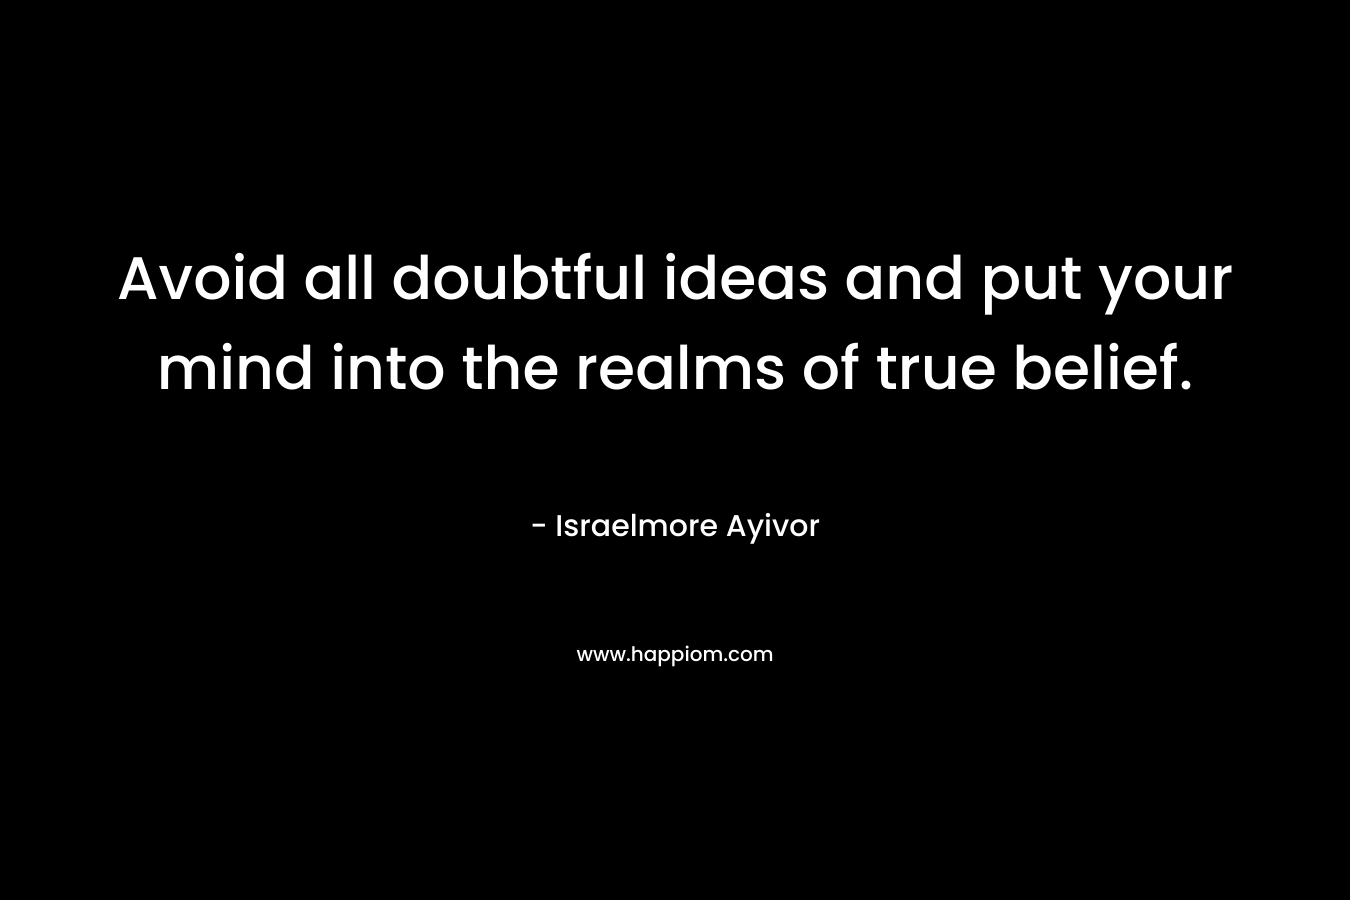 Avoid all doubtful ideas and put your mind into the realms of true belief.